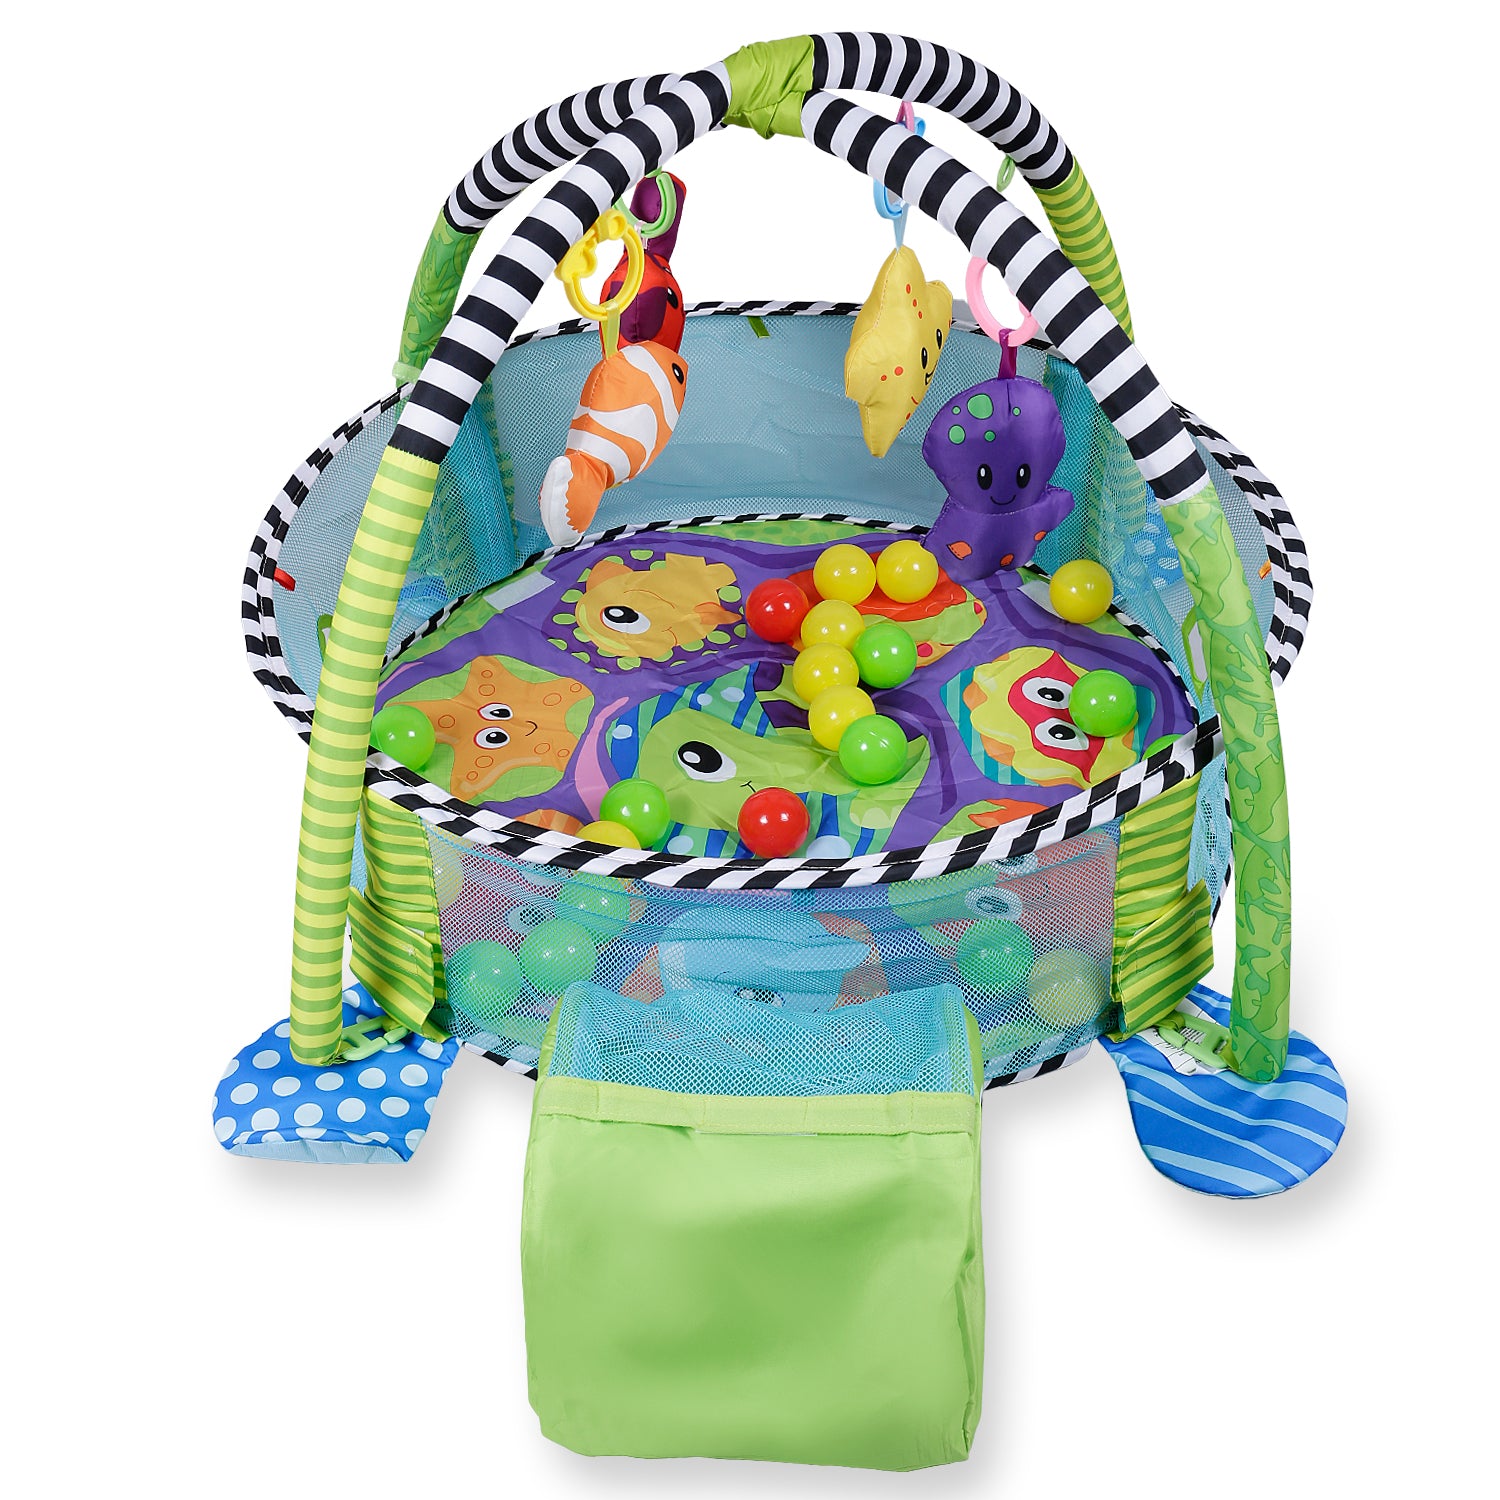 Baby Moo Turtle Infant Play Mat Activity Gym With Hanging Toys And Balls - Green